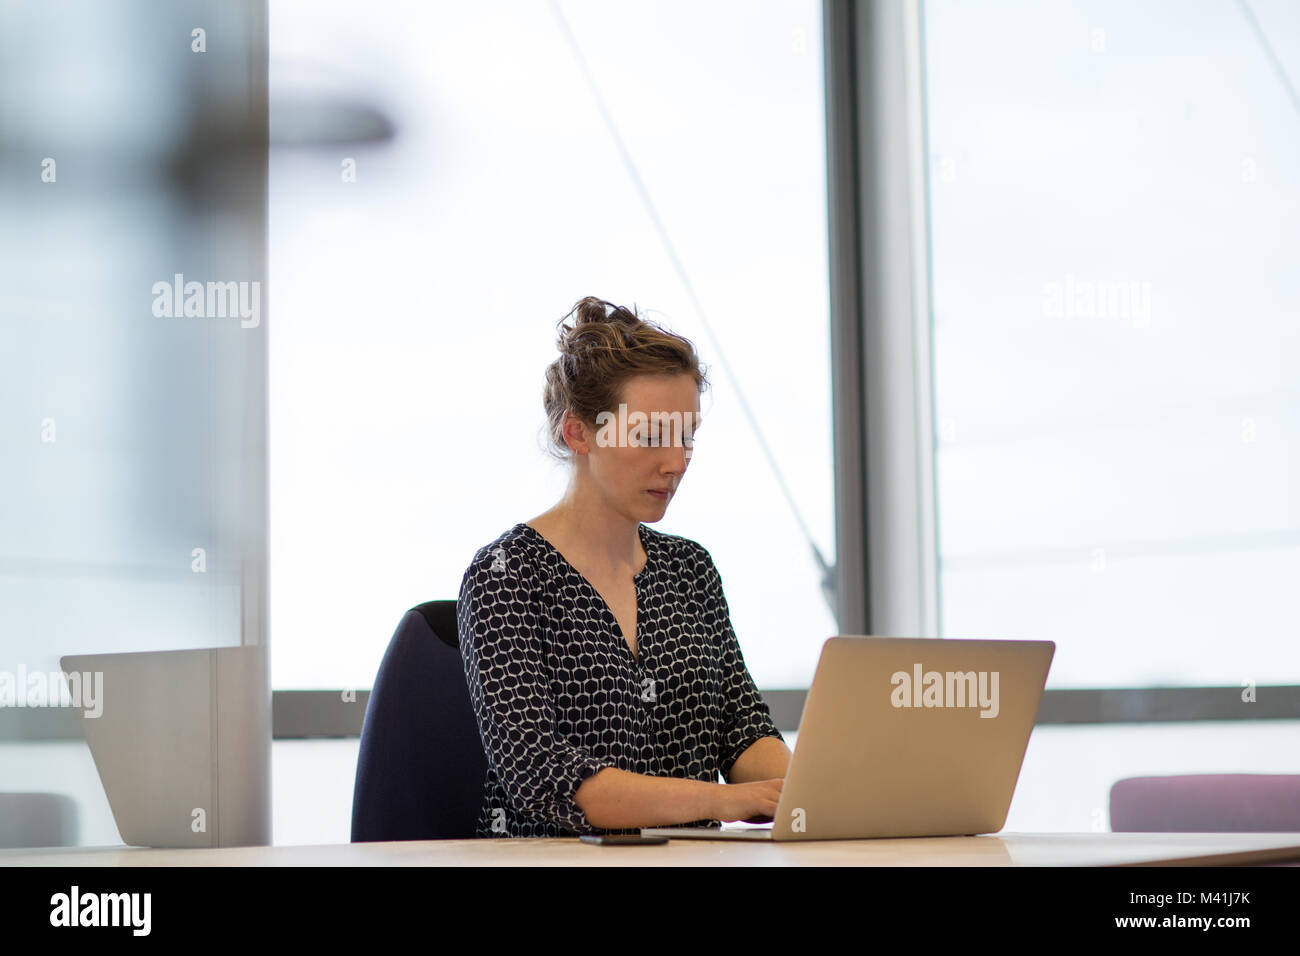 Female executive working in office on laptop Banque D'Images